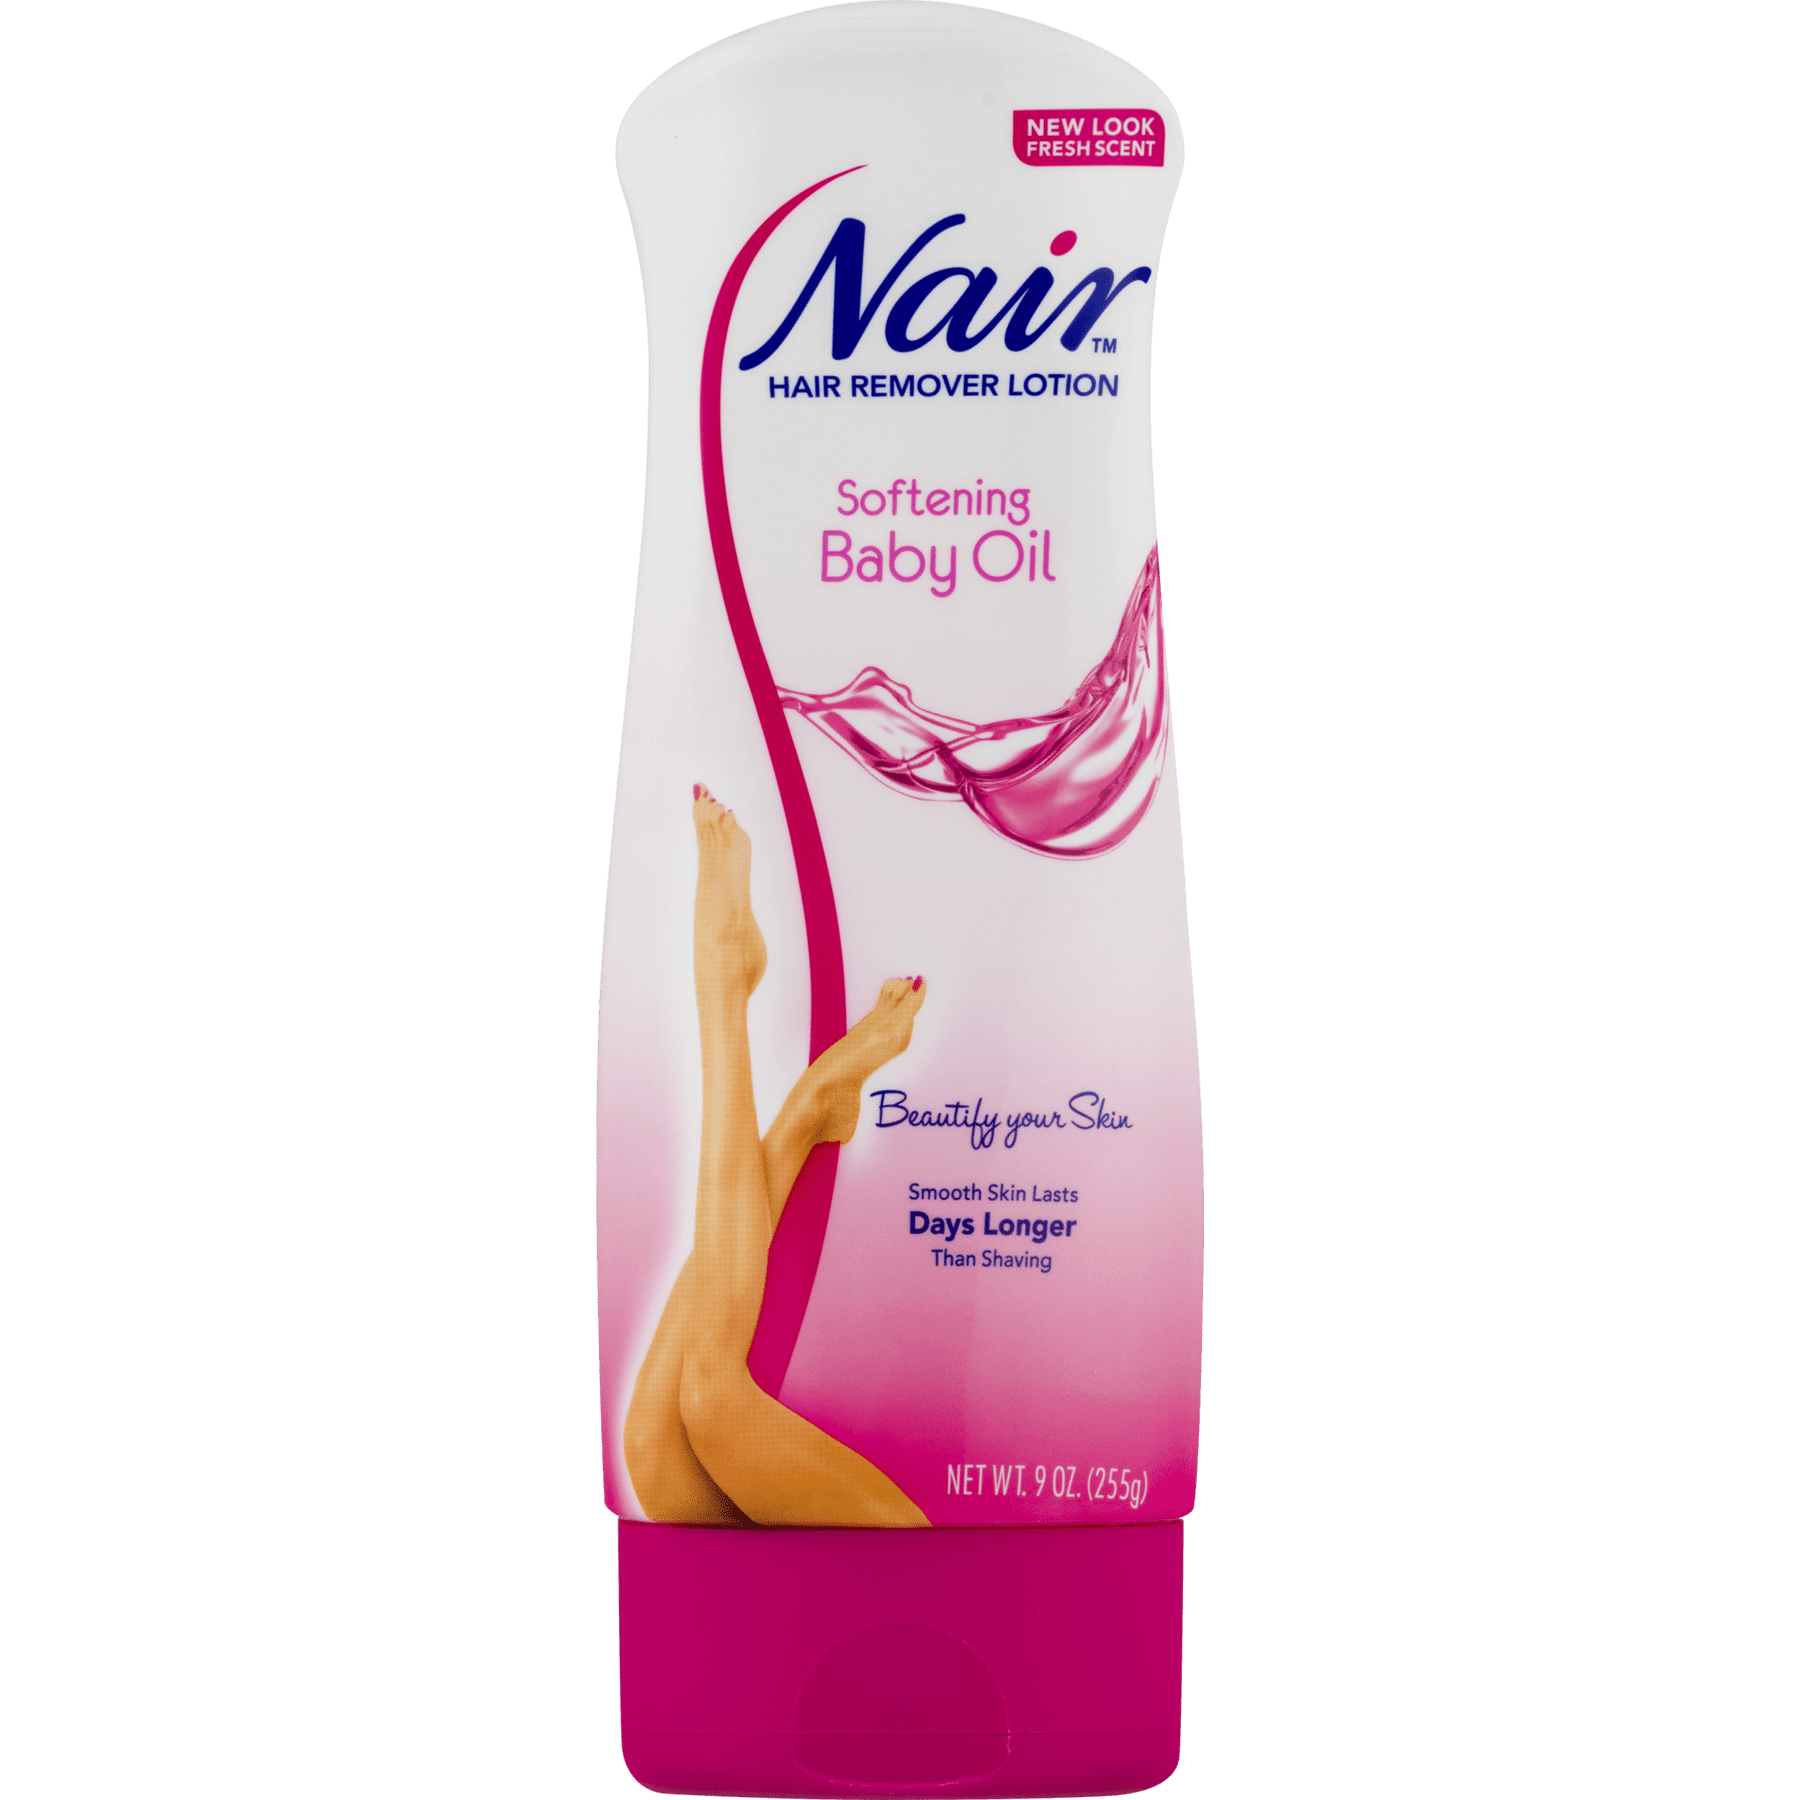 Nair Hair Remover Lotion Softening Baby Oil Comforting Scent 90